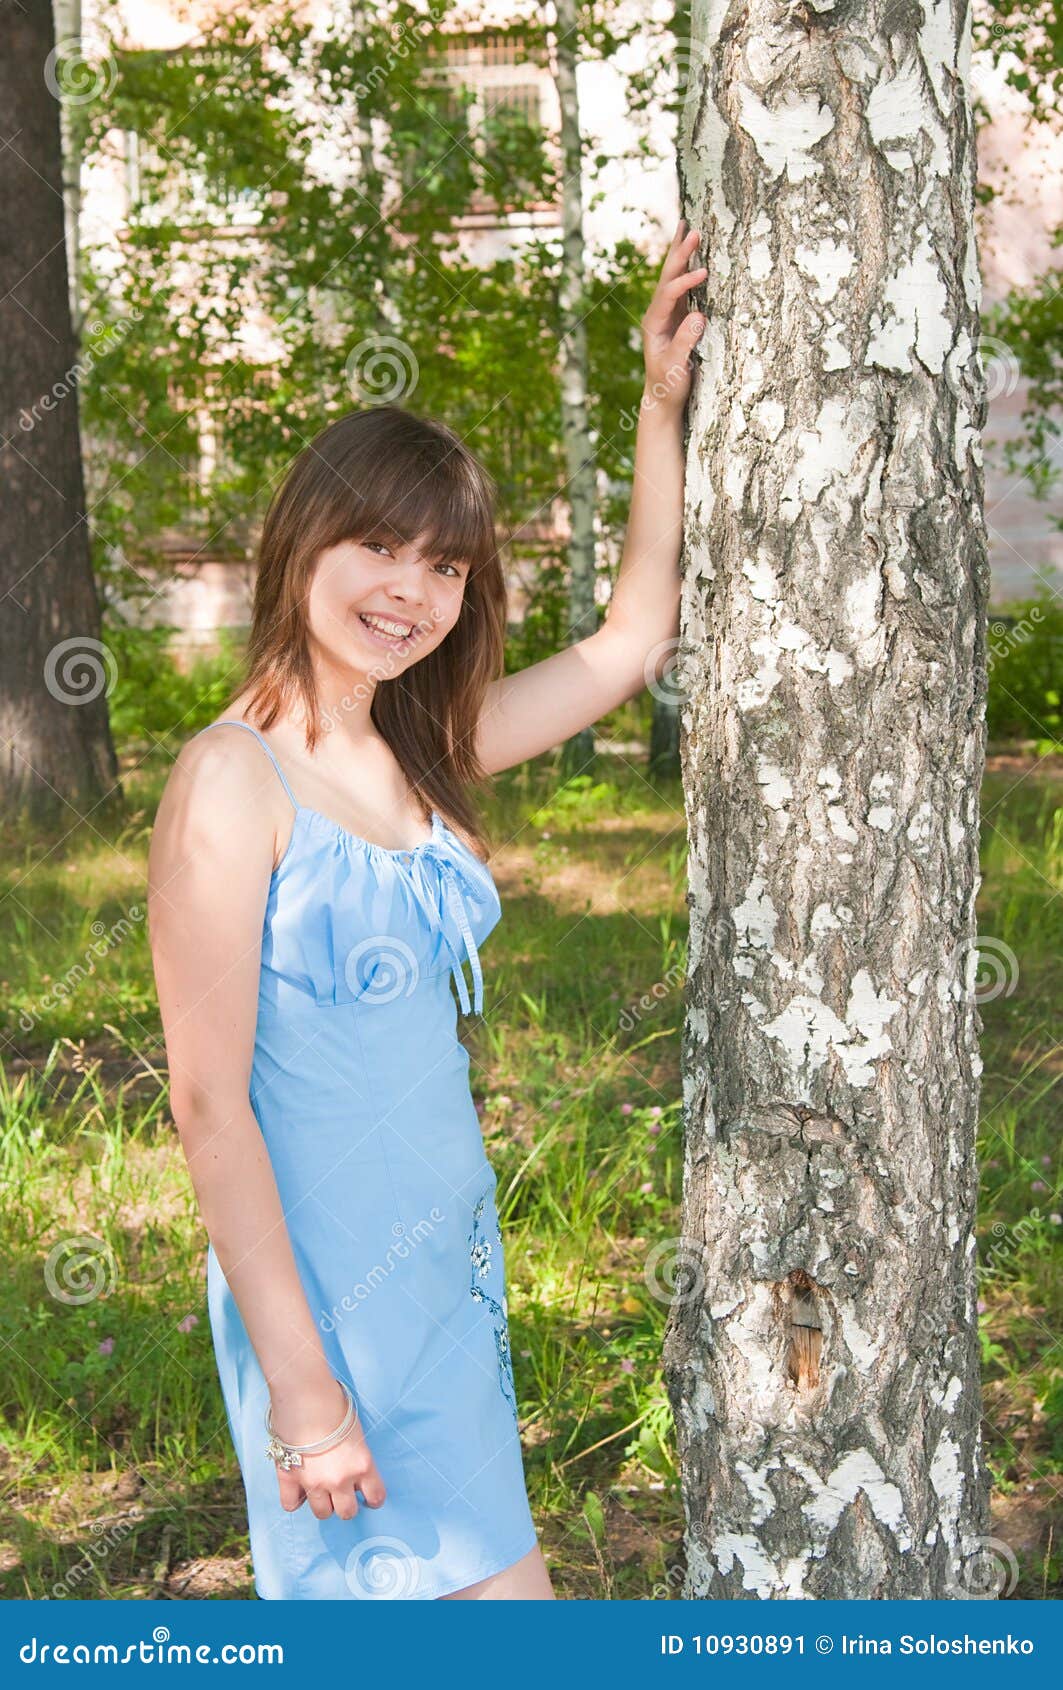 The Romantic Girl Stands Near To a Birch Stock Image - Image of hair ...